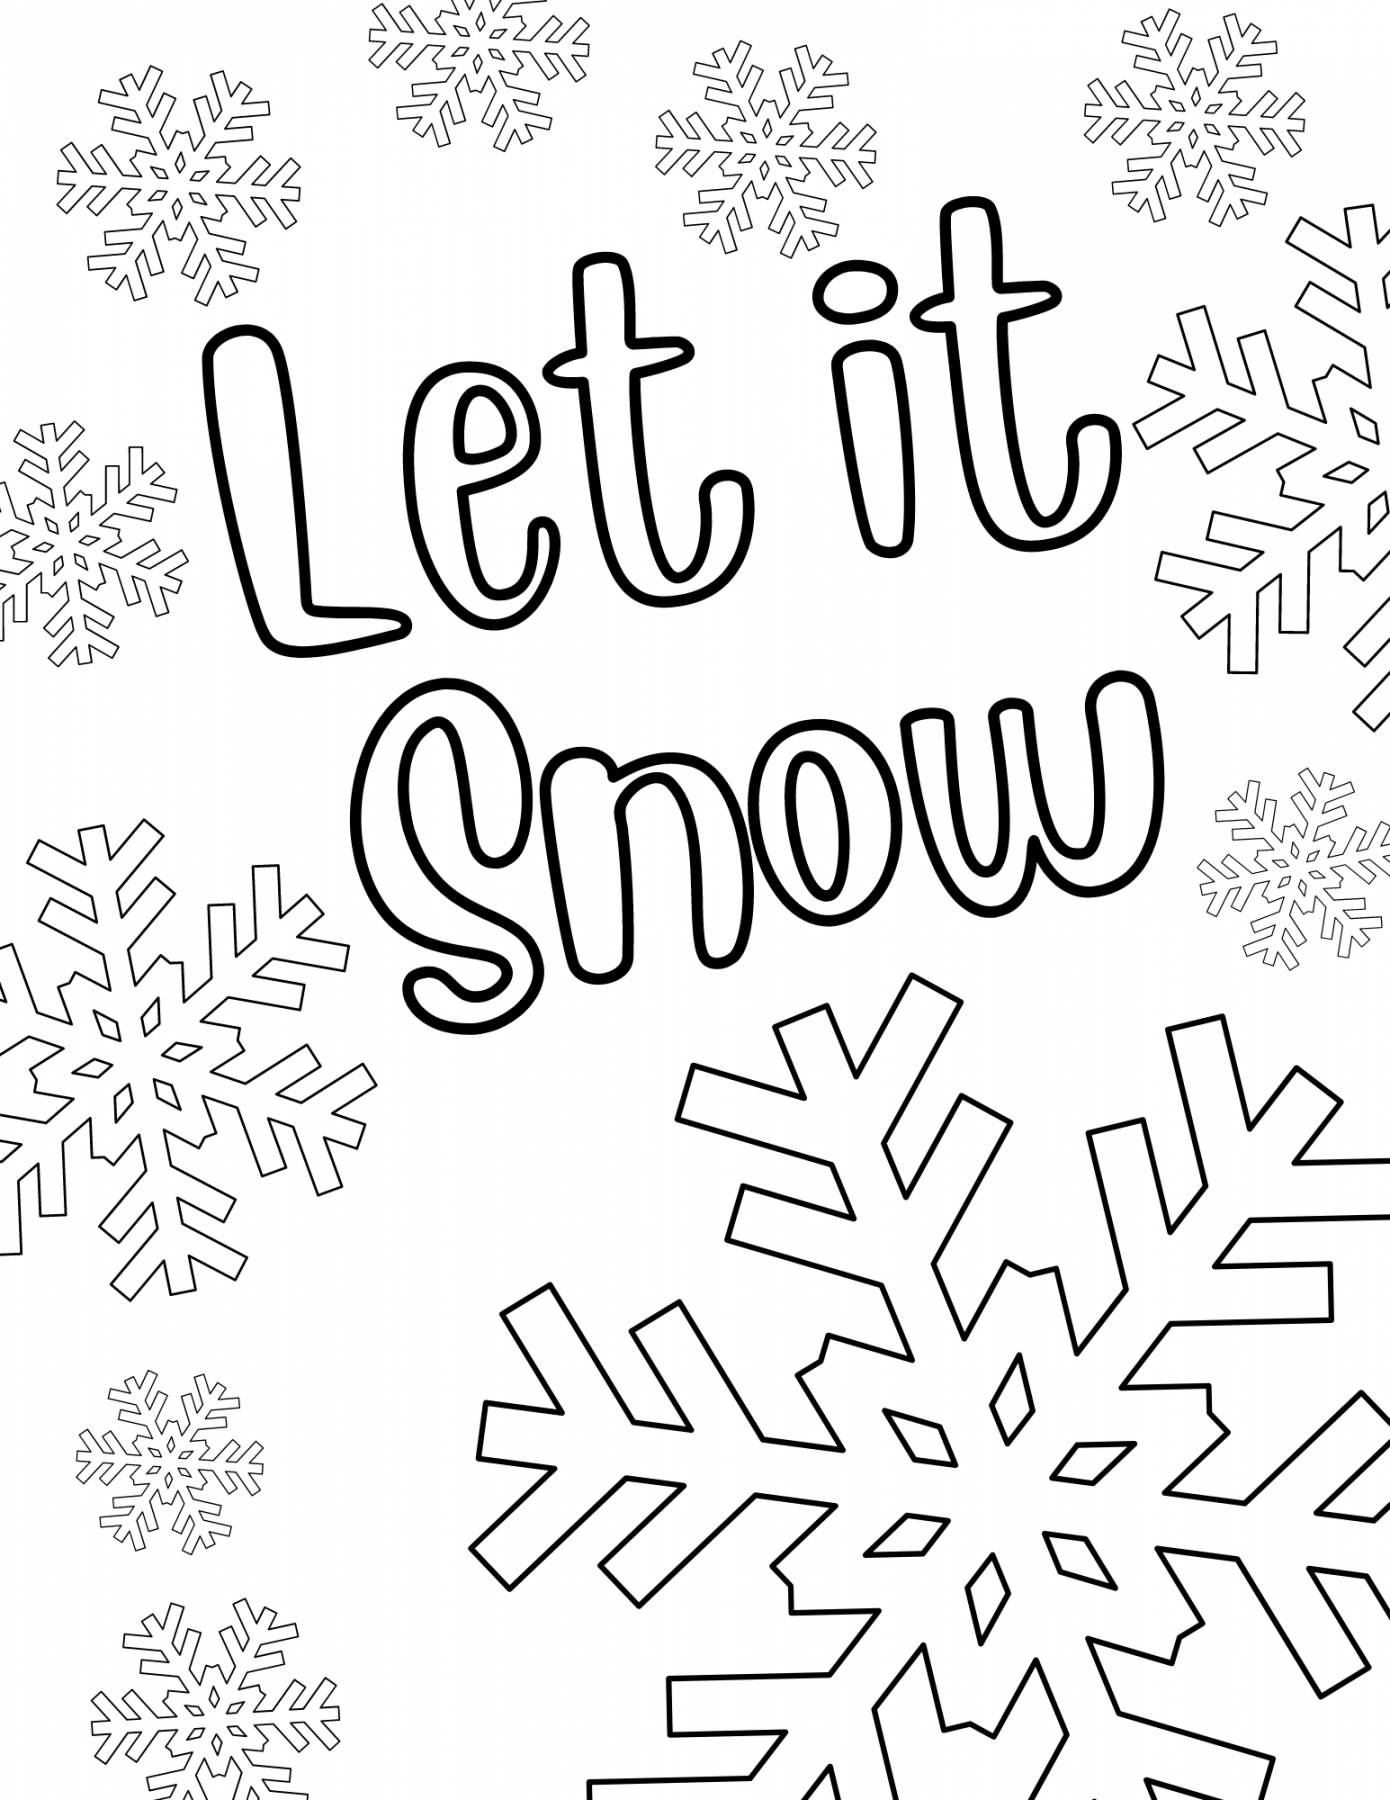 Free Printable Winter Coloring Pages - Printable - Free Printable Winter Coloring Pages for Kids